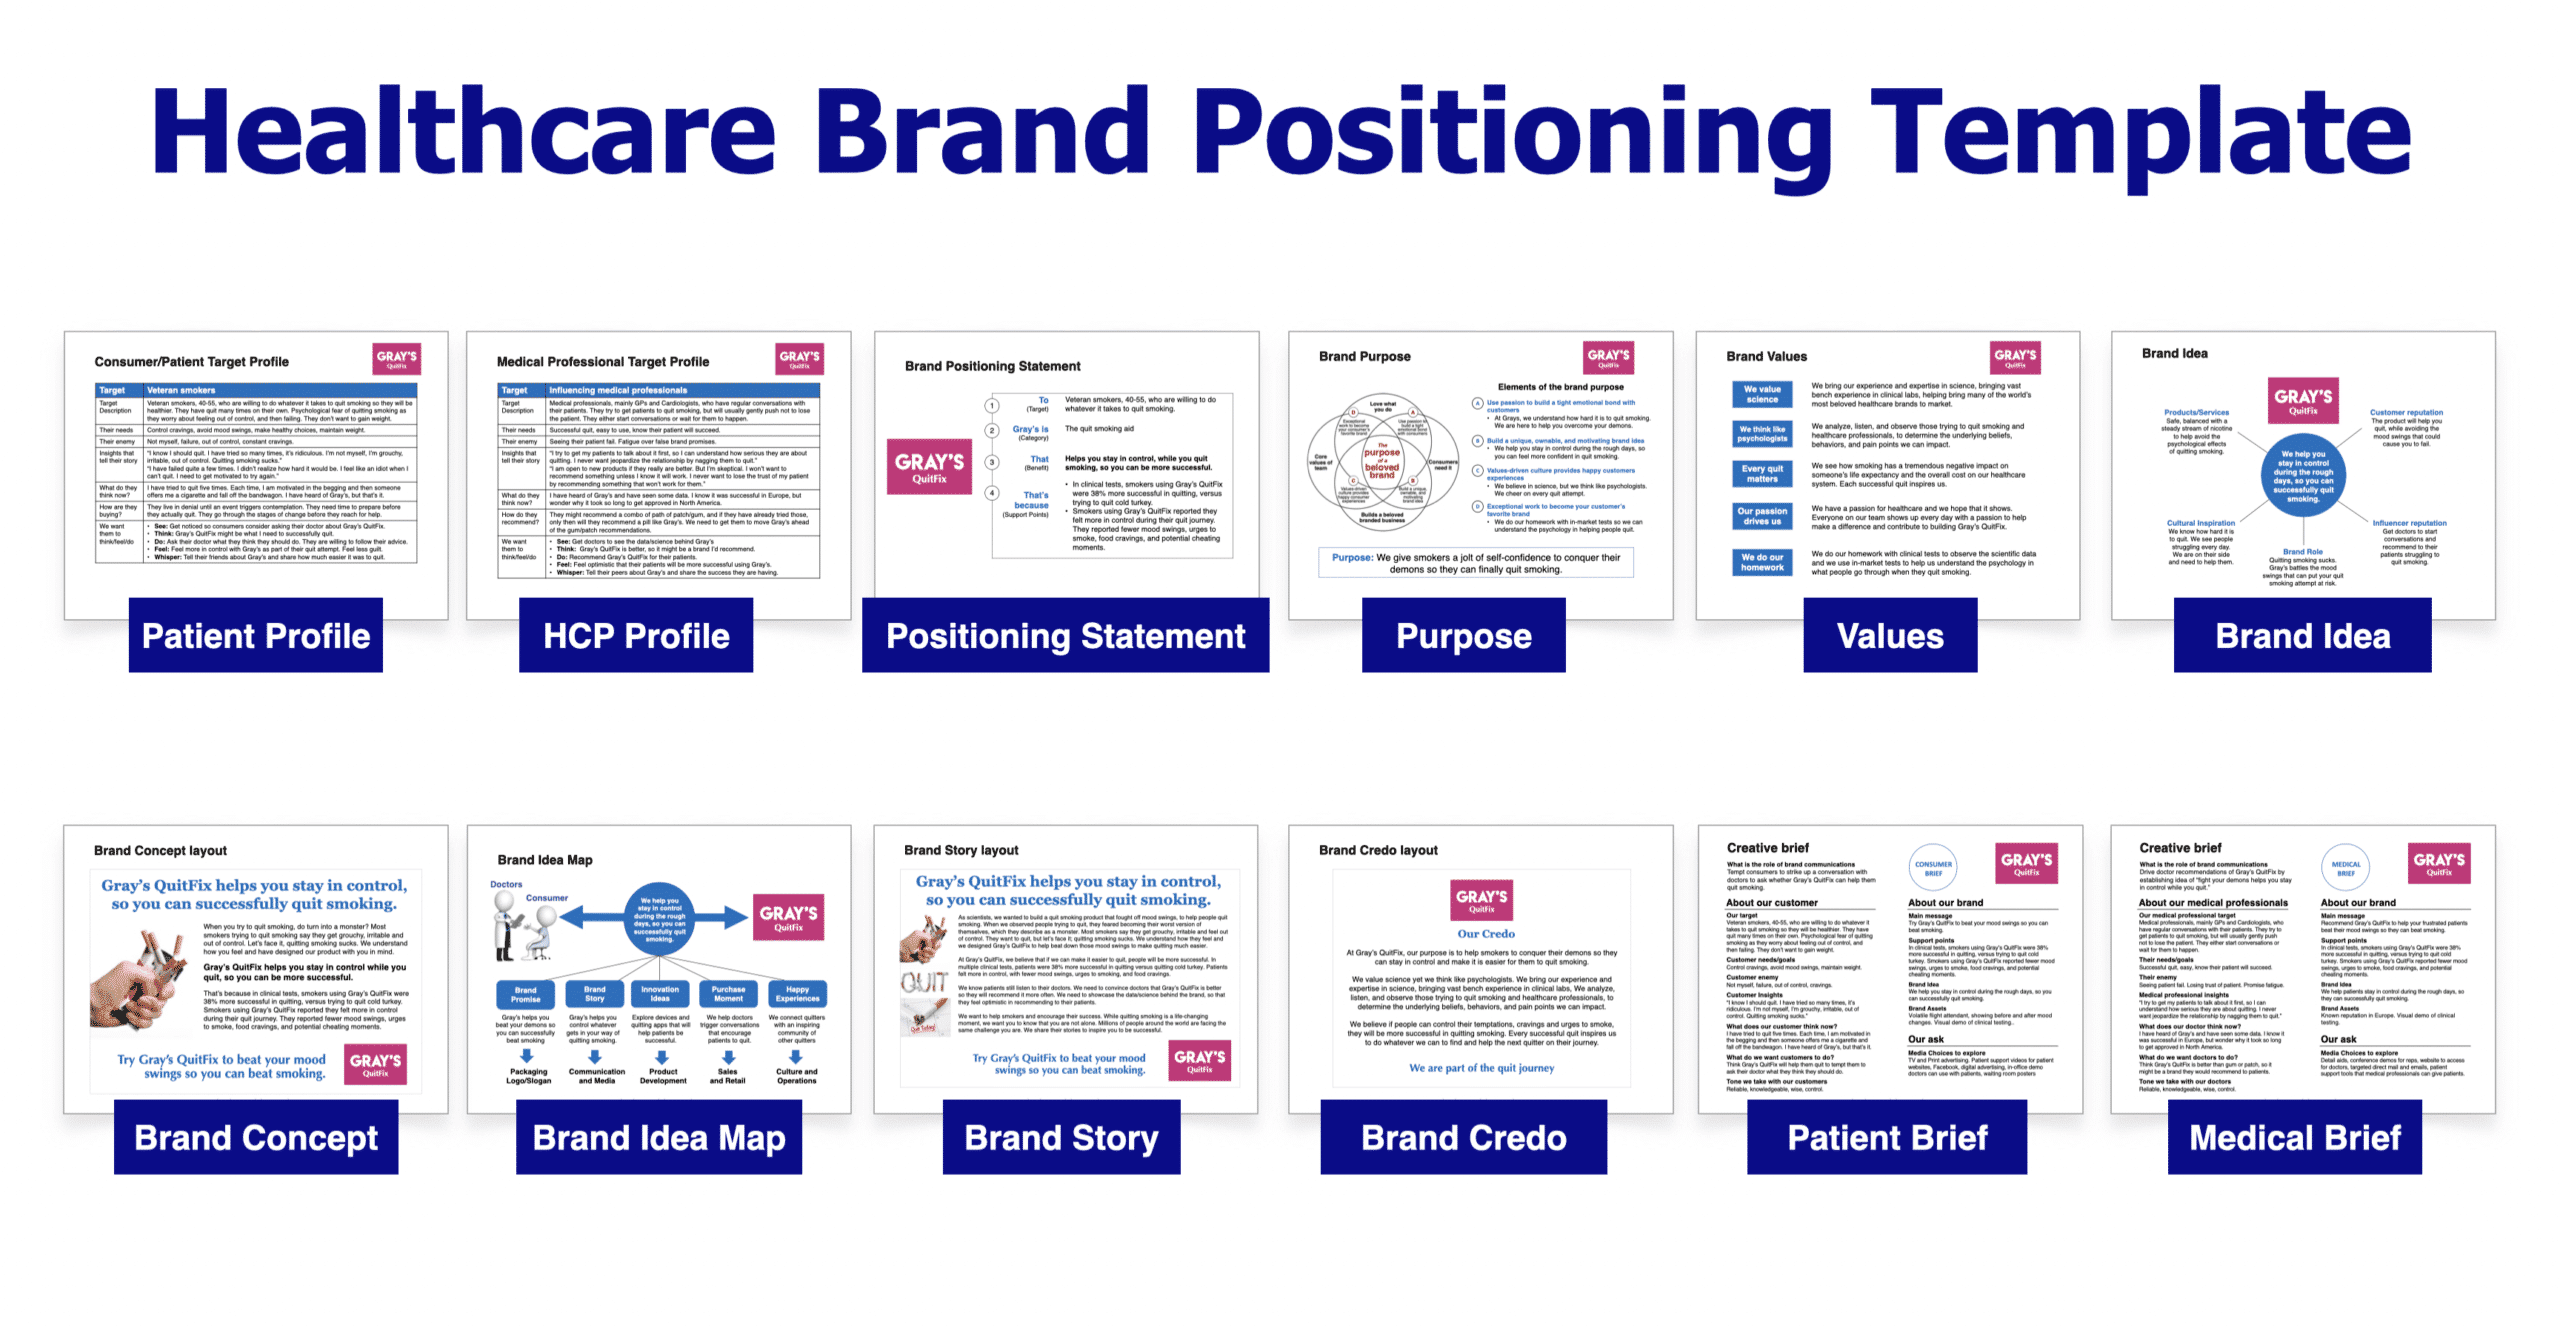 Healthcare Brand Positioning Template to use in our Healthcare Brand Toolkit